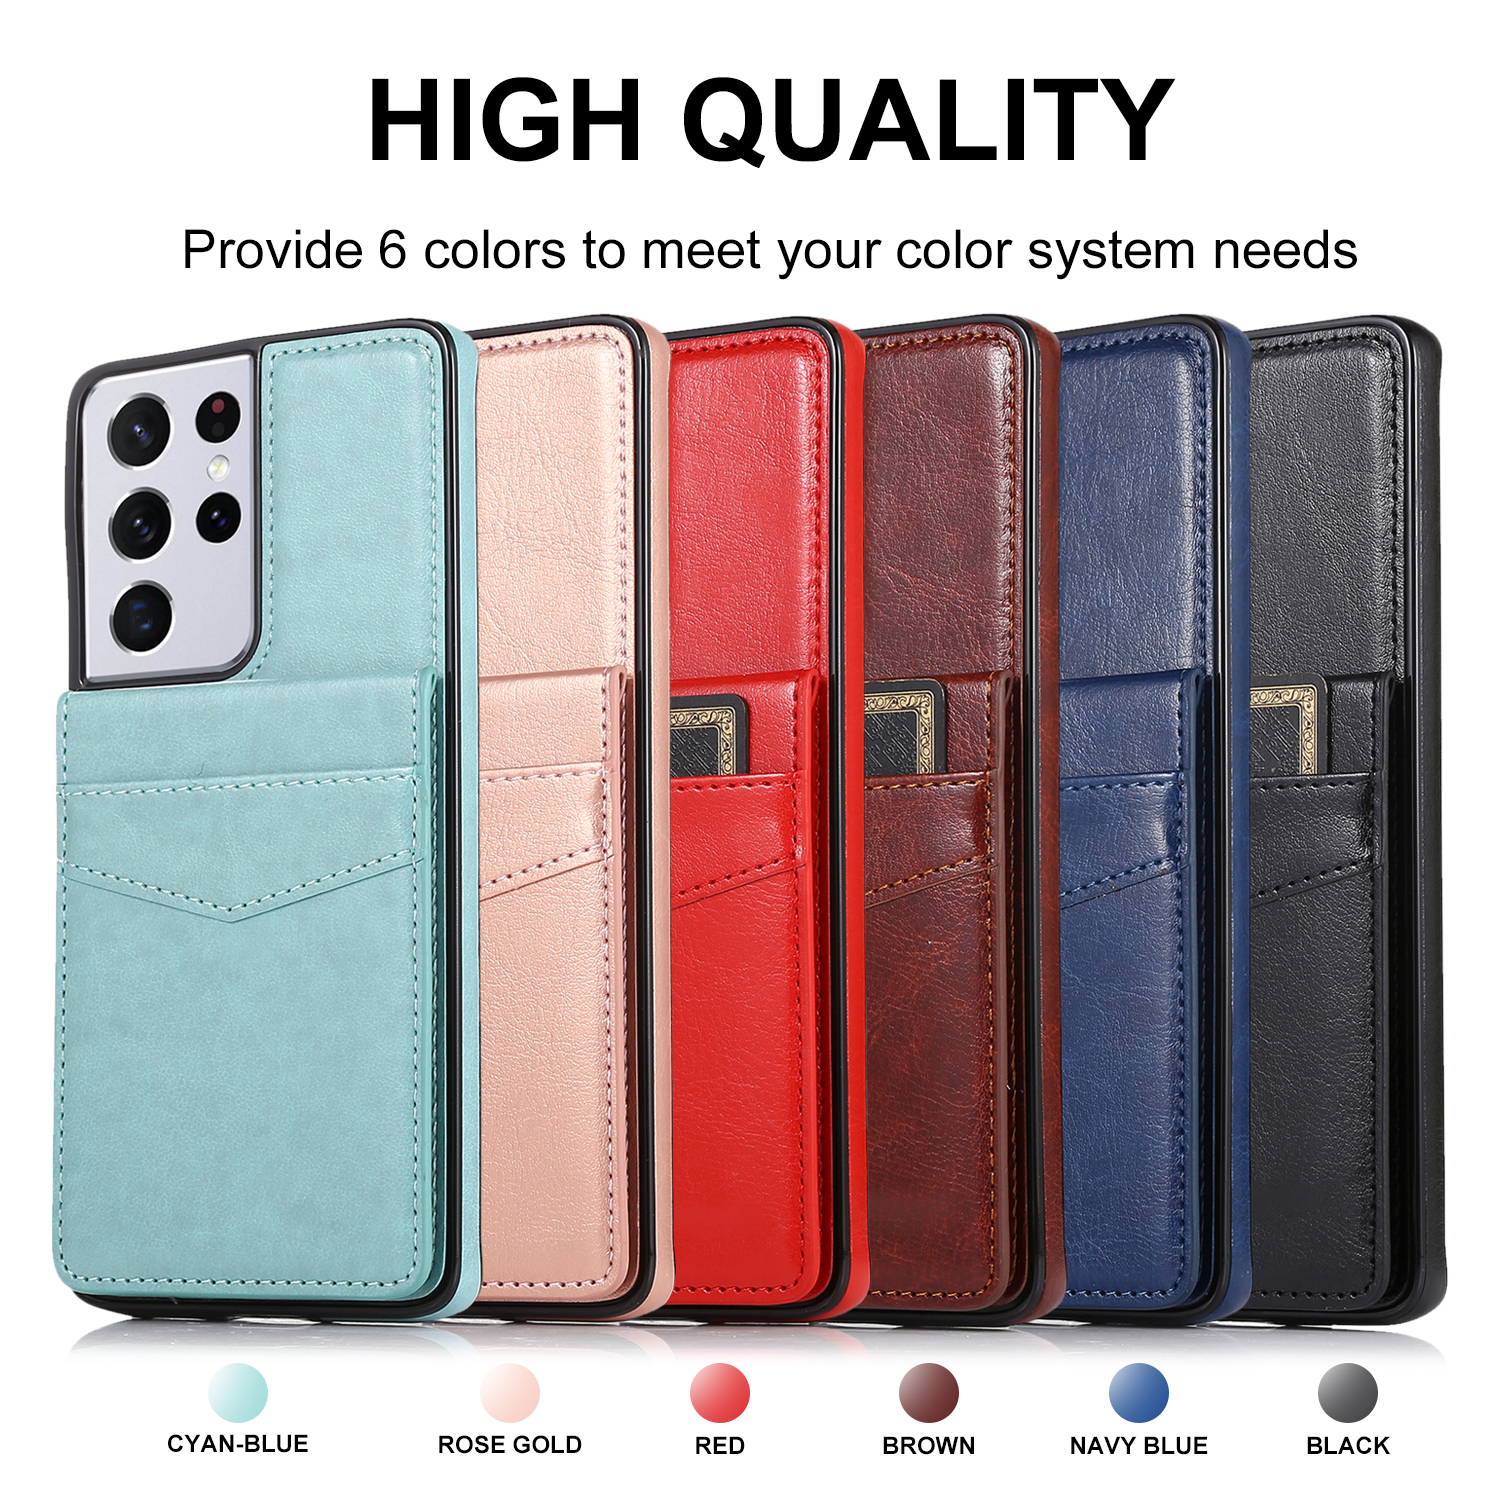 Shockproof Phone Cases for Samsung Galaxy S22 S21 S20 Note20 Ultra Note10 Plus Pure Color PU Leather Kickstand Cover Case with the Opening Card Holder Up and Down